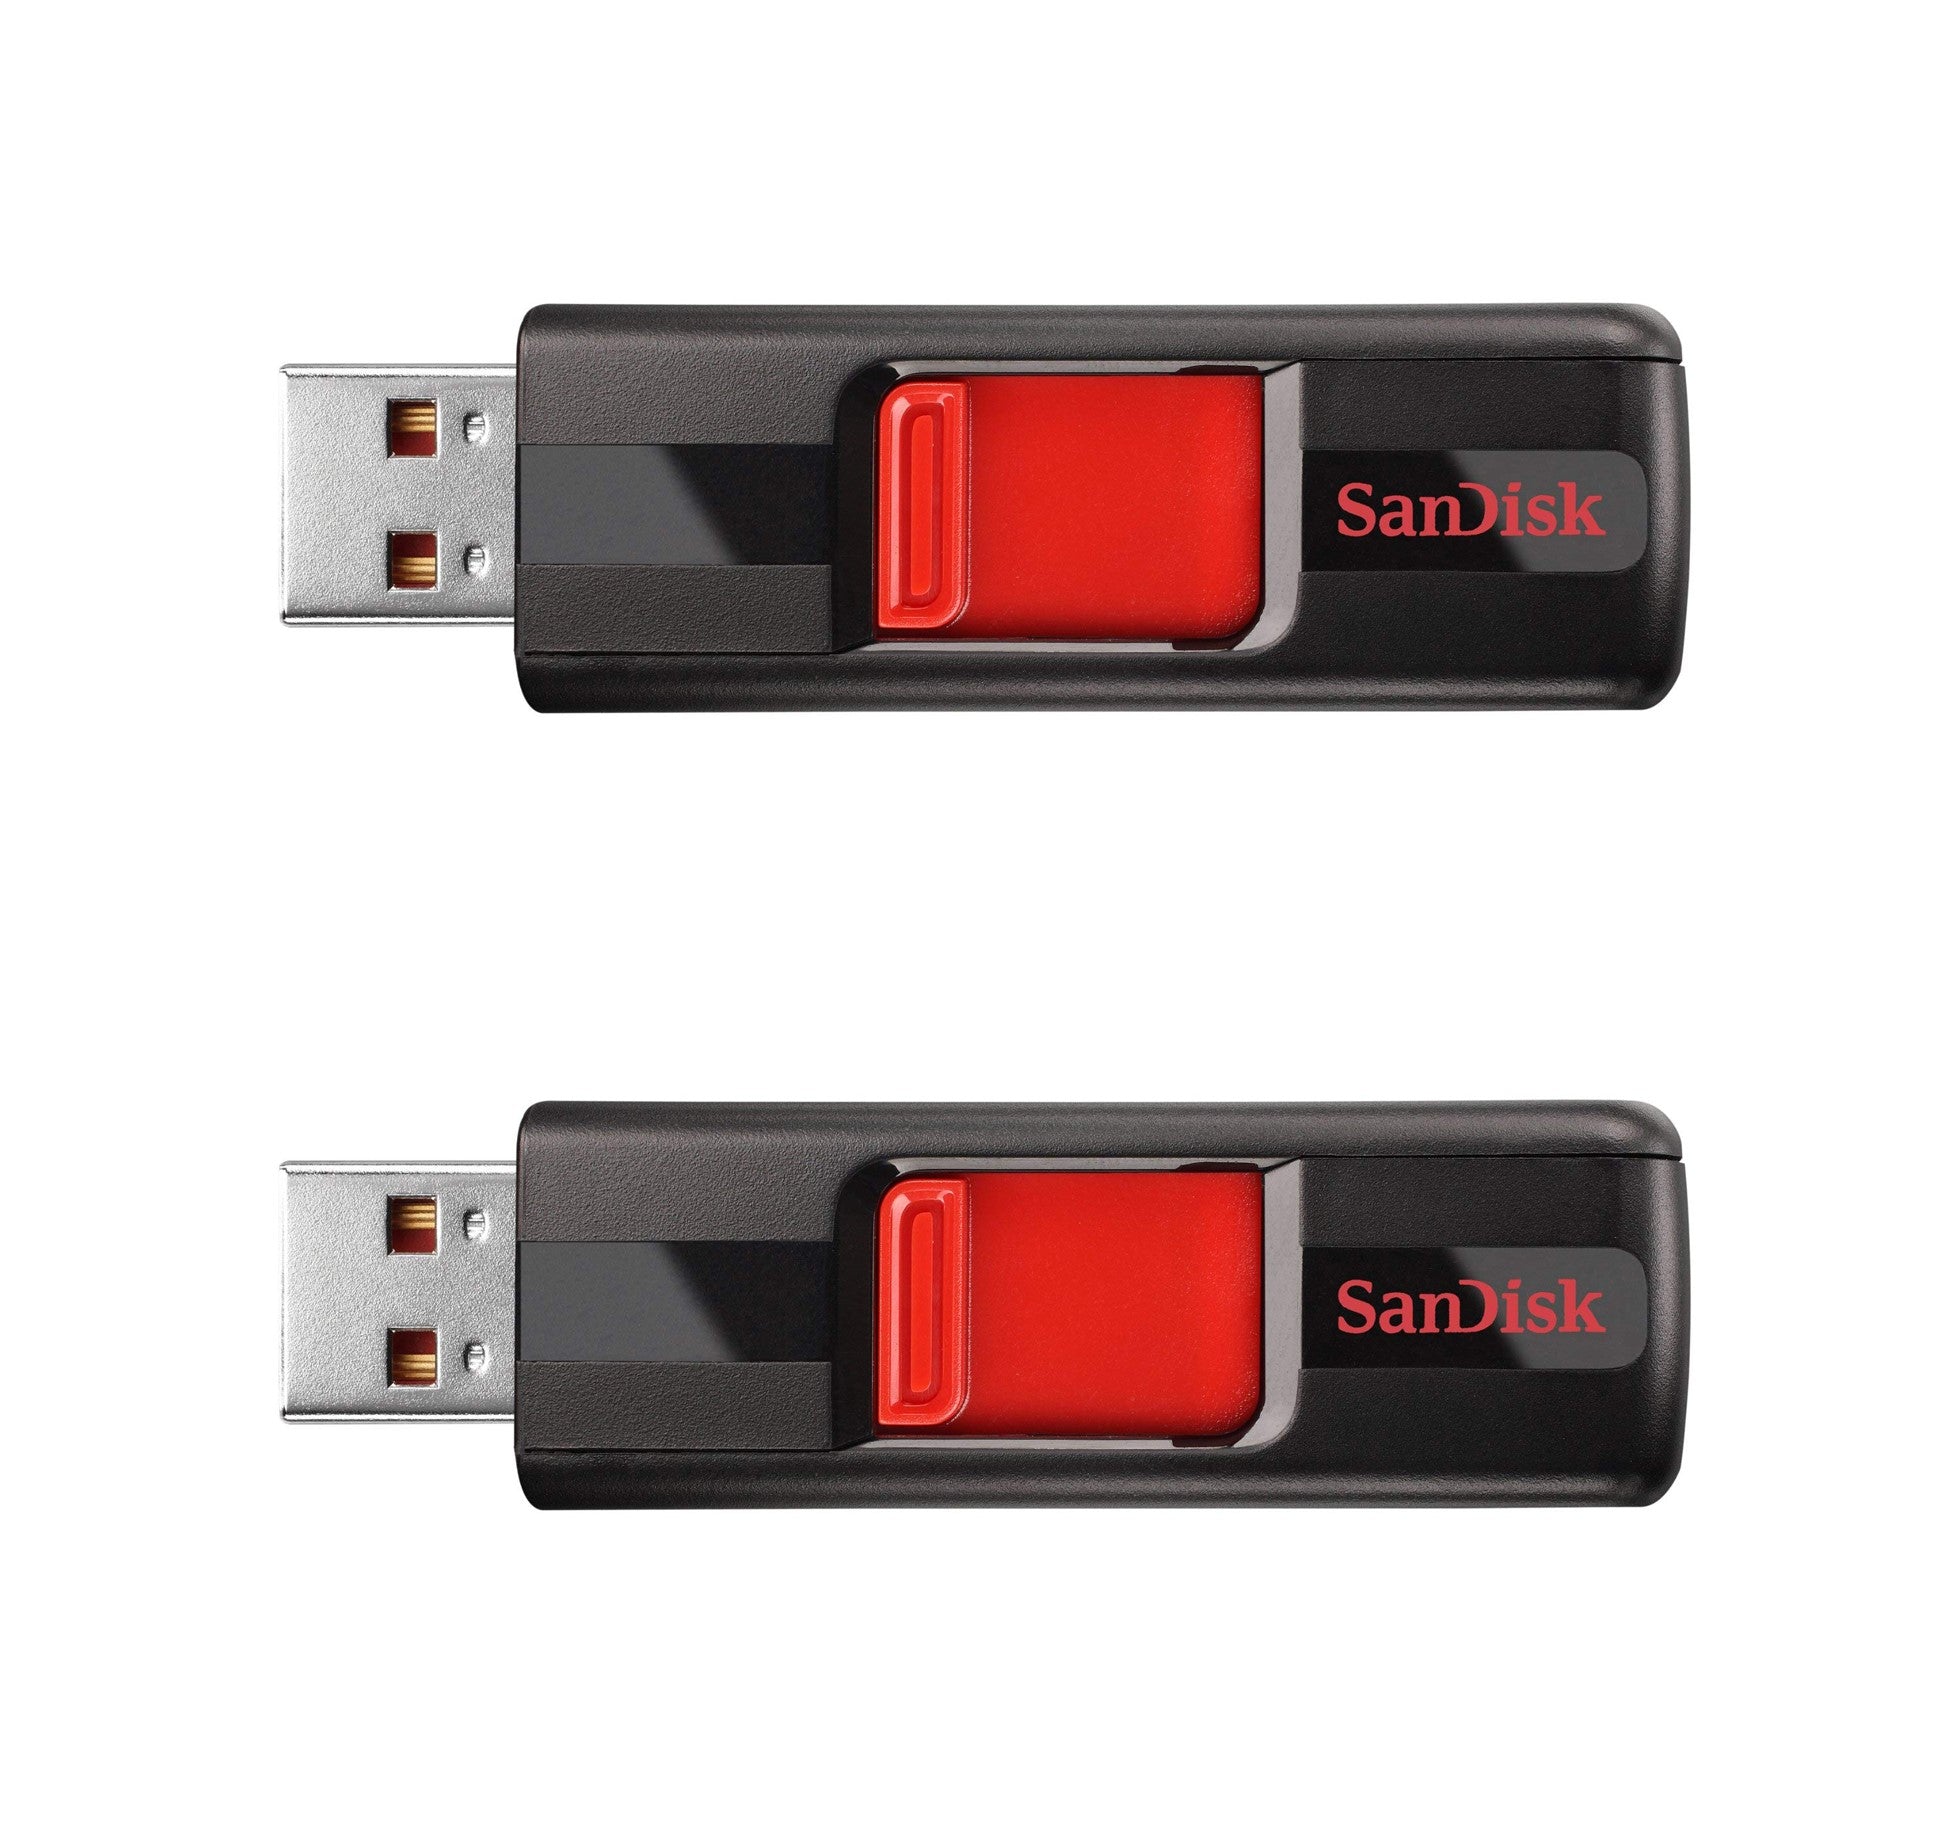 SanDisk Cruzer 128GB USB 2.0 Flash Drive (SDCZ36-128G-B35) Pack of Two